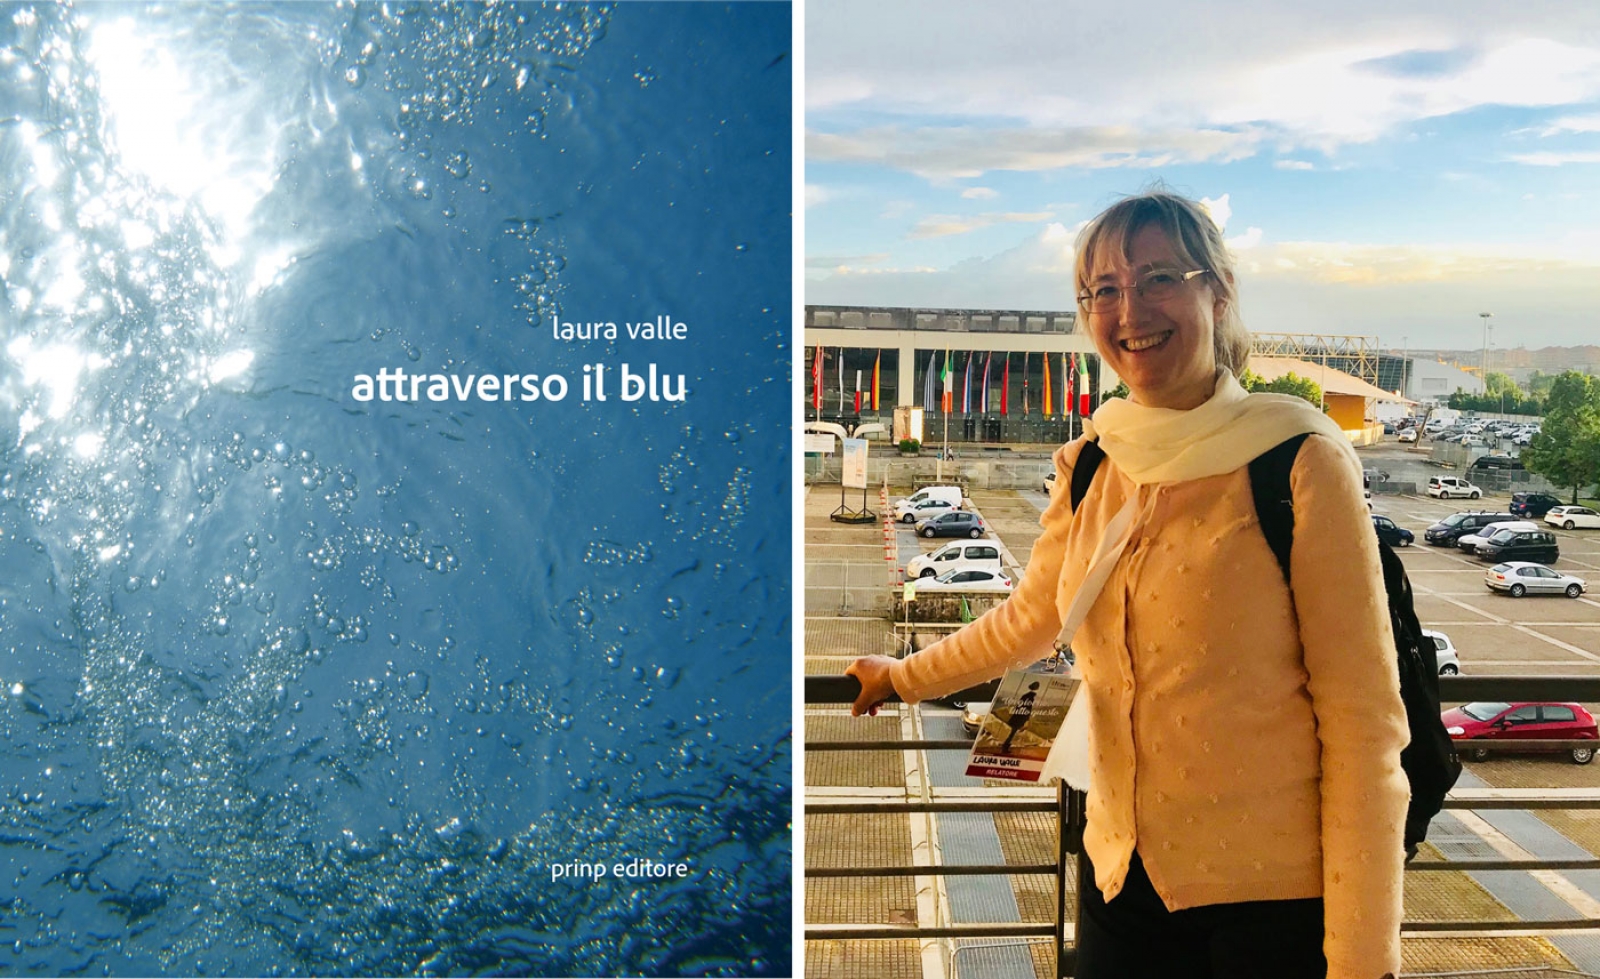 Meeting with Laura Valle - Attraverso Il Blu